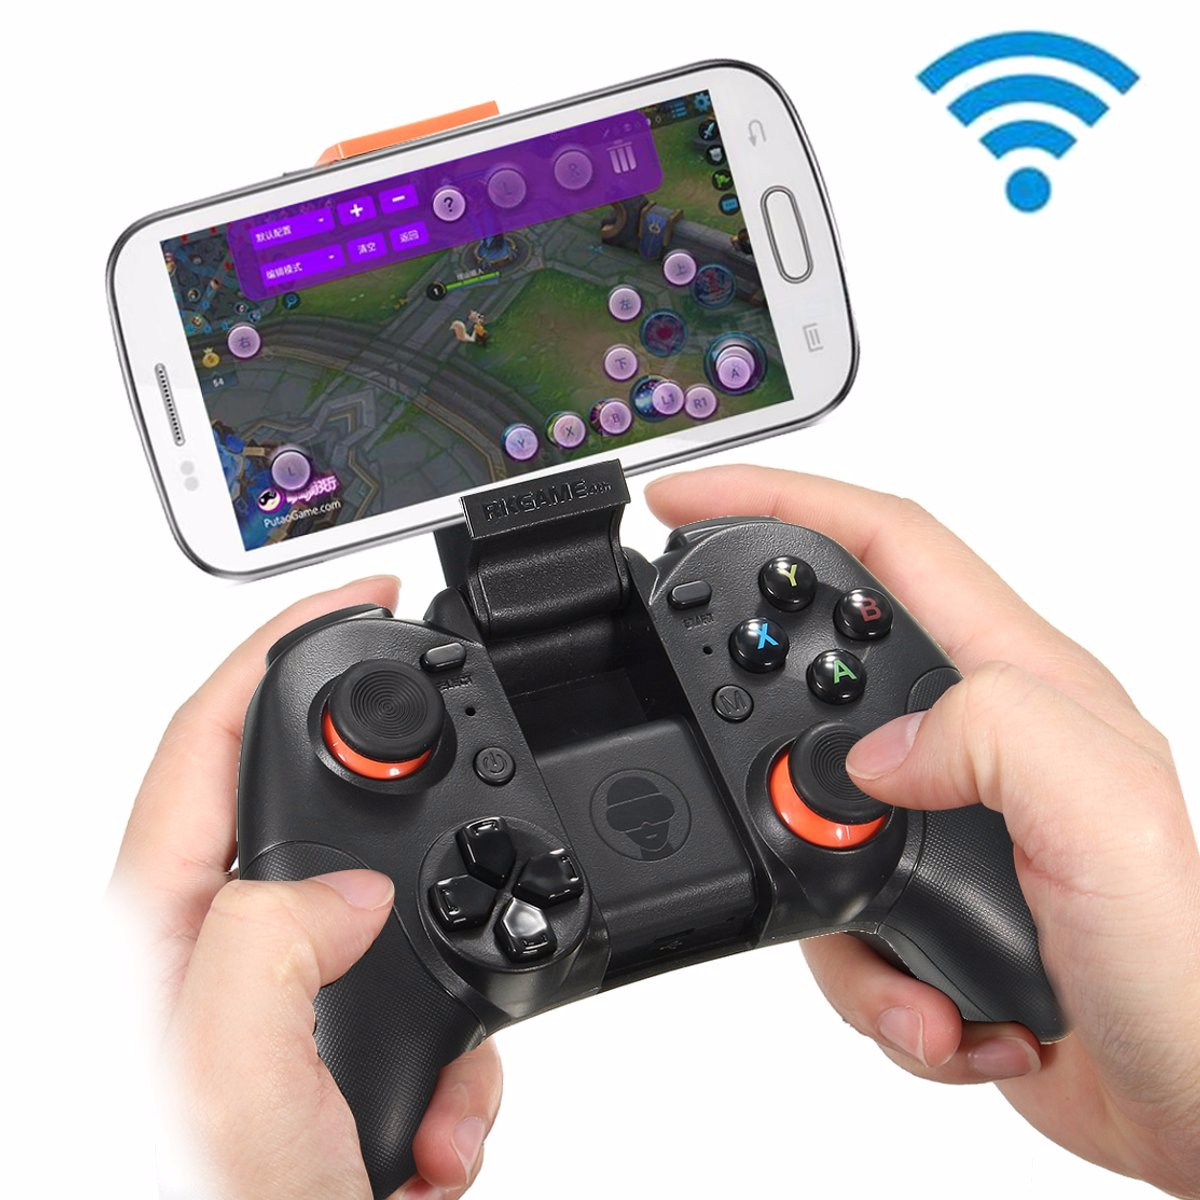 

Bluetooth 4.0 Wireless Game Controller Gamepad Joystick for Android iOS PC